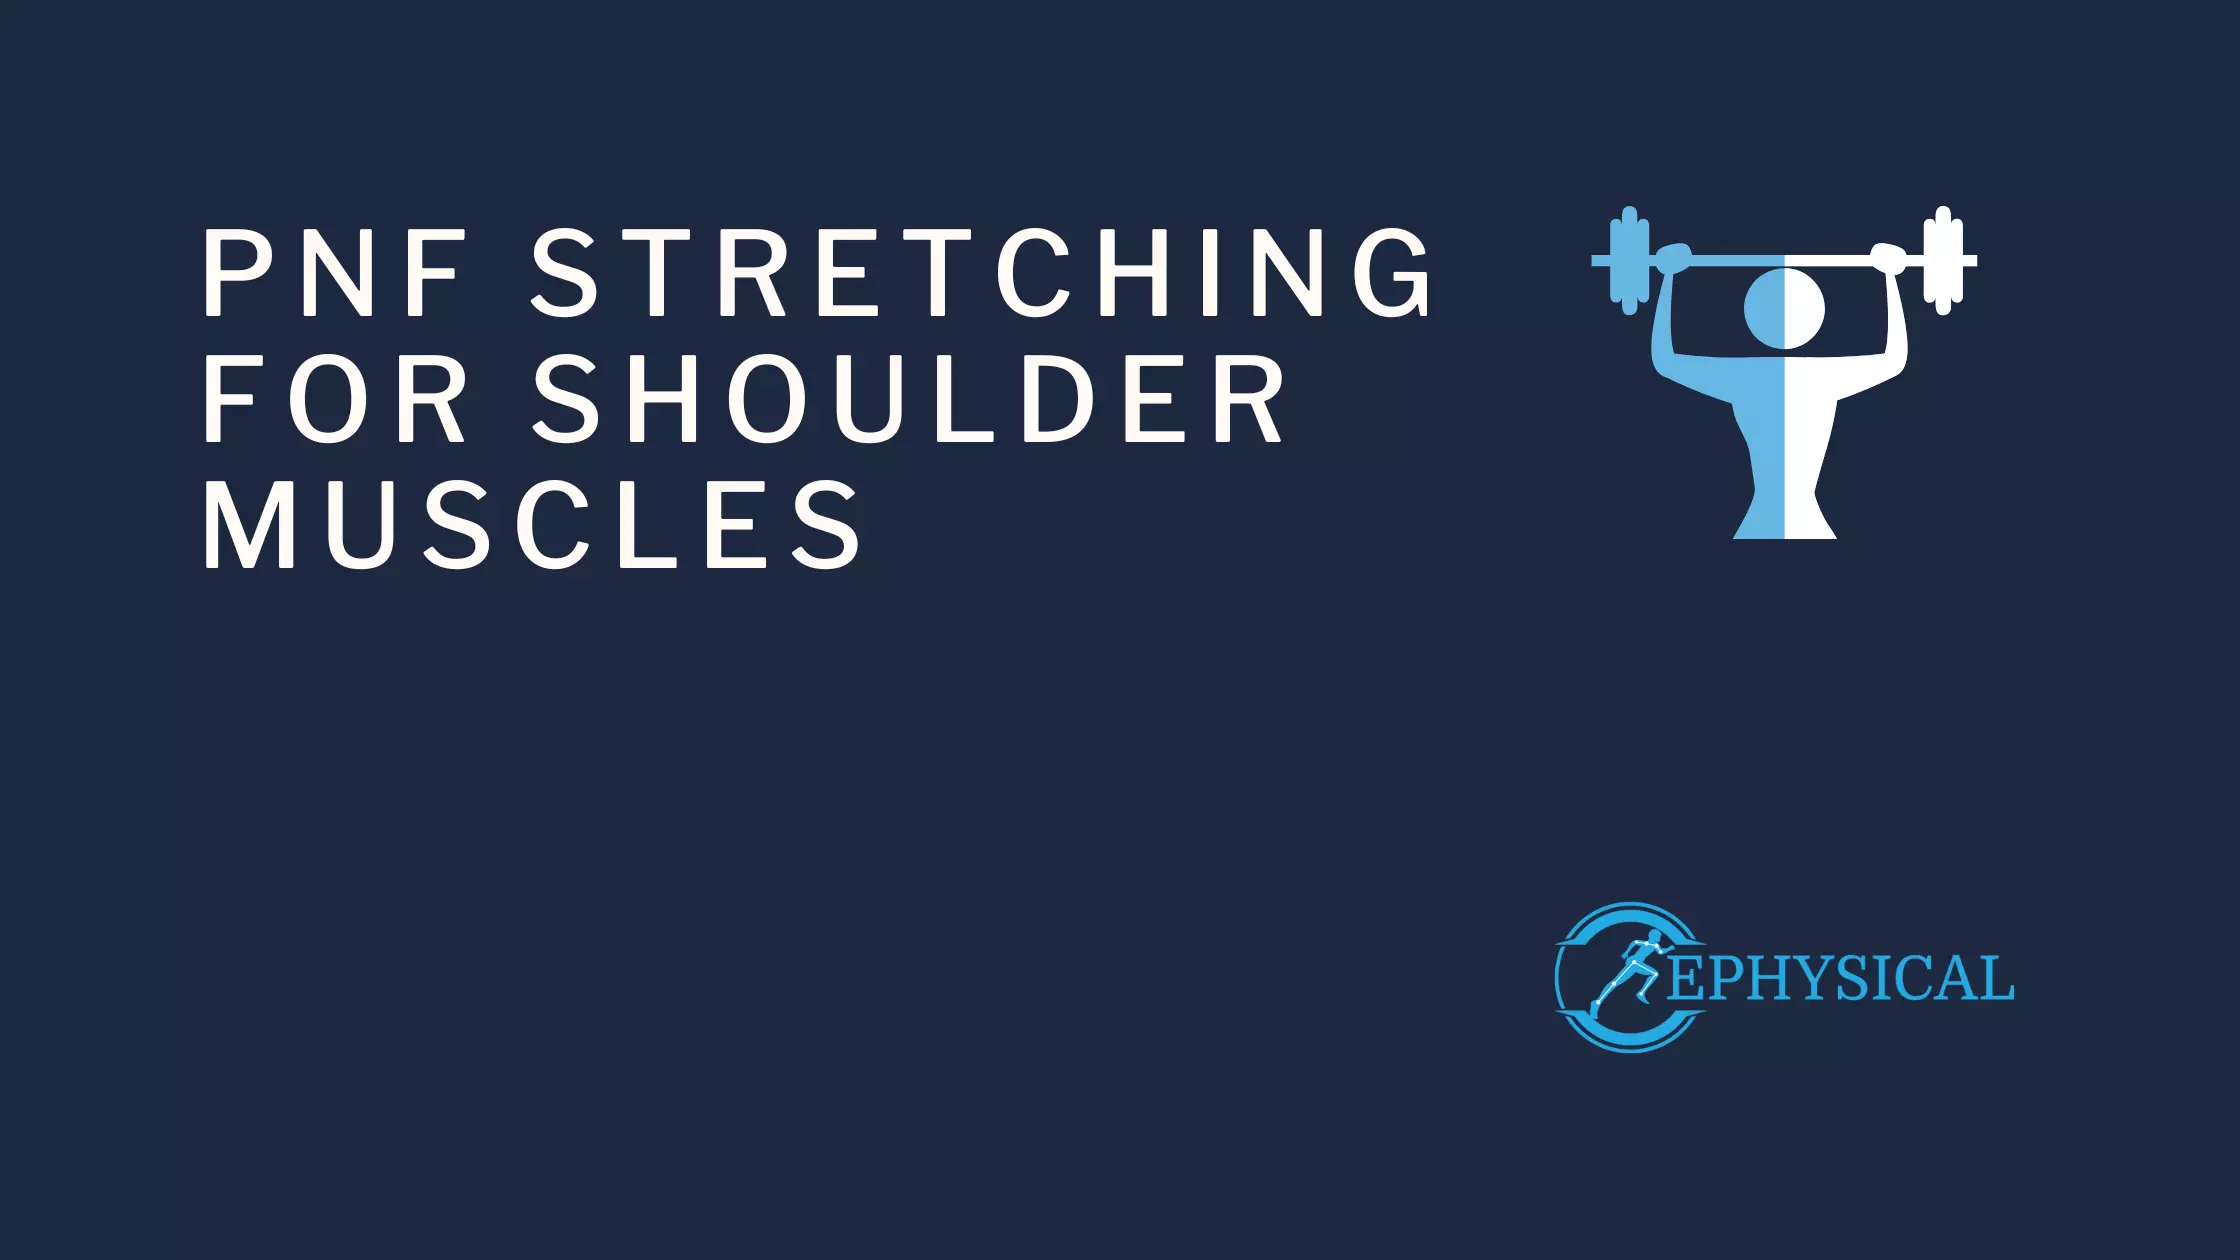 pnf stretching for shoulder